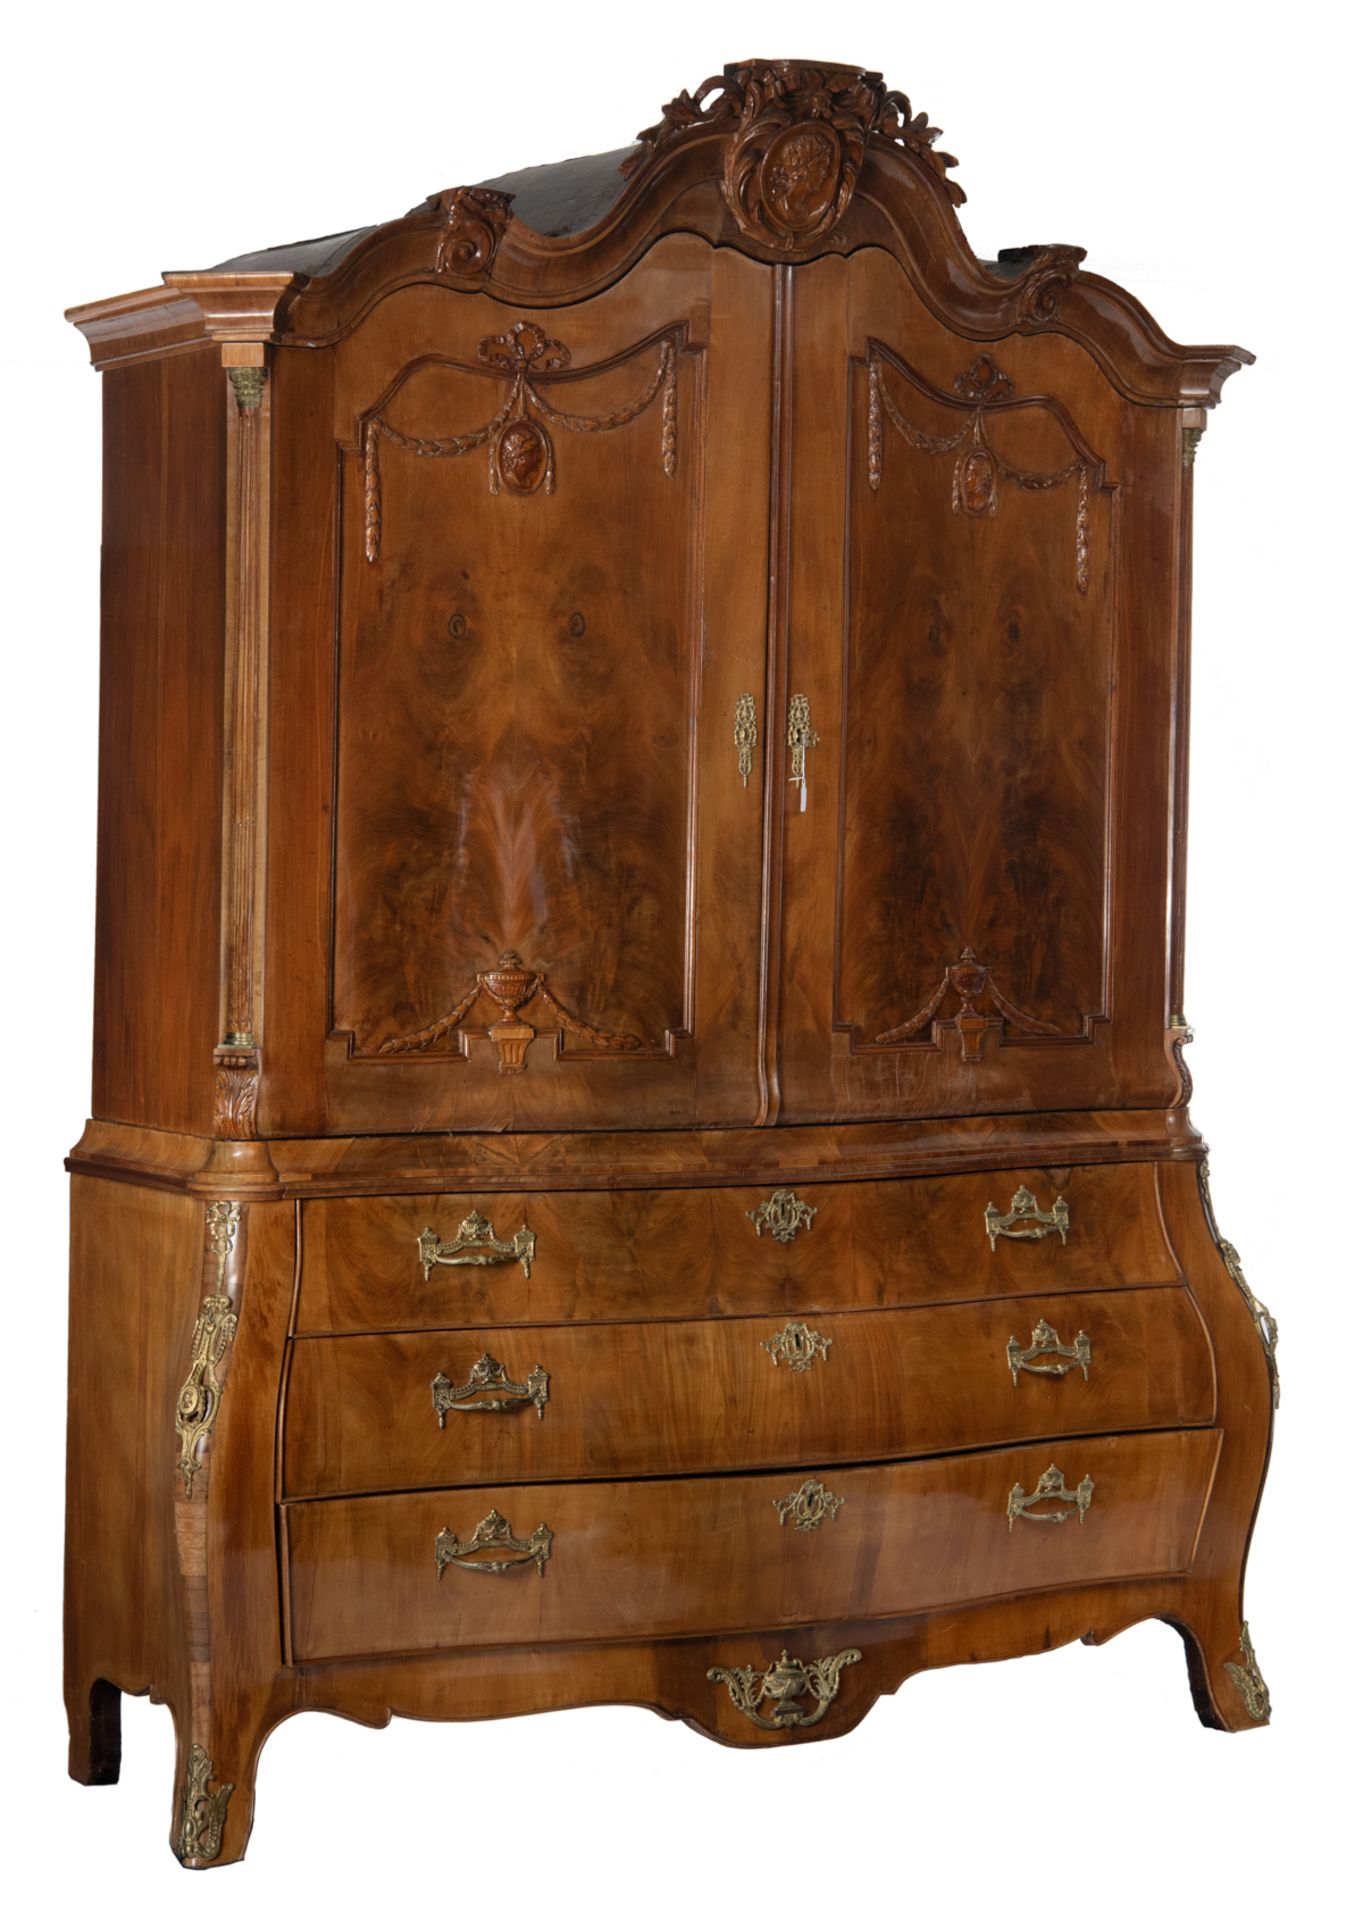 A large and imposing mahogany veneered Dutch Neoclassical cabinet, decorated with gilt bronze mounts